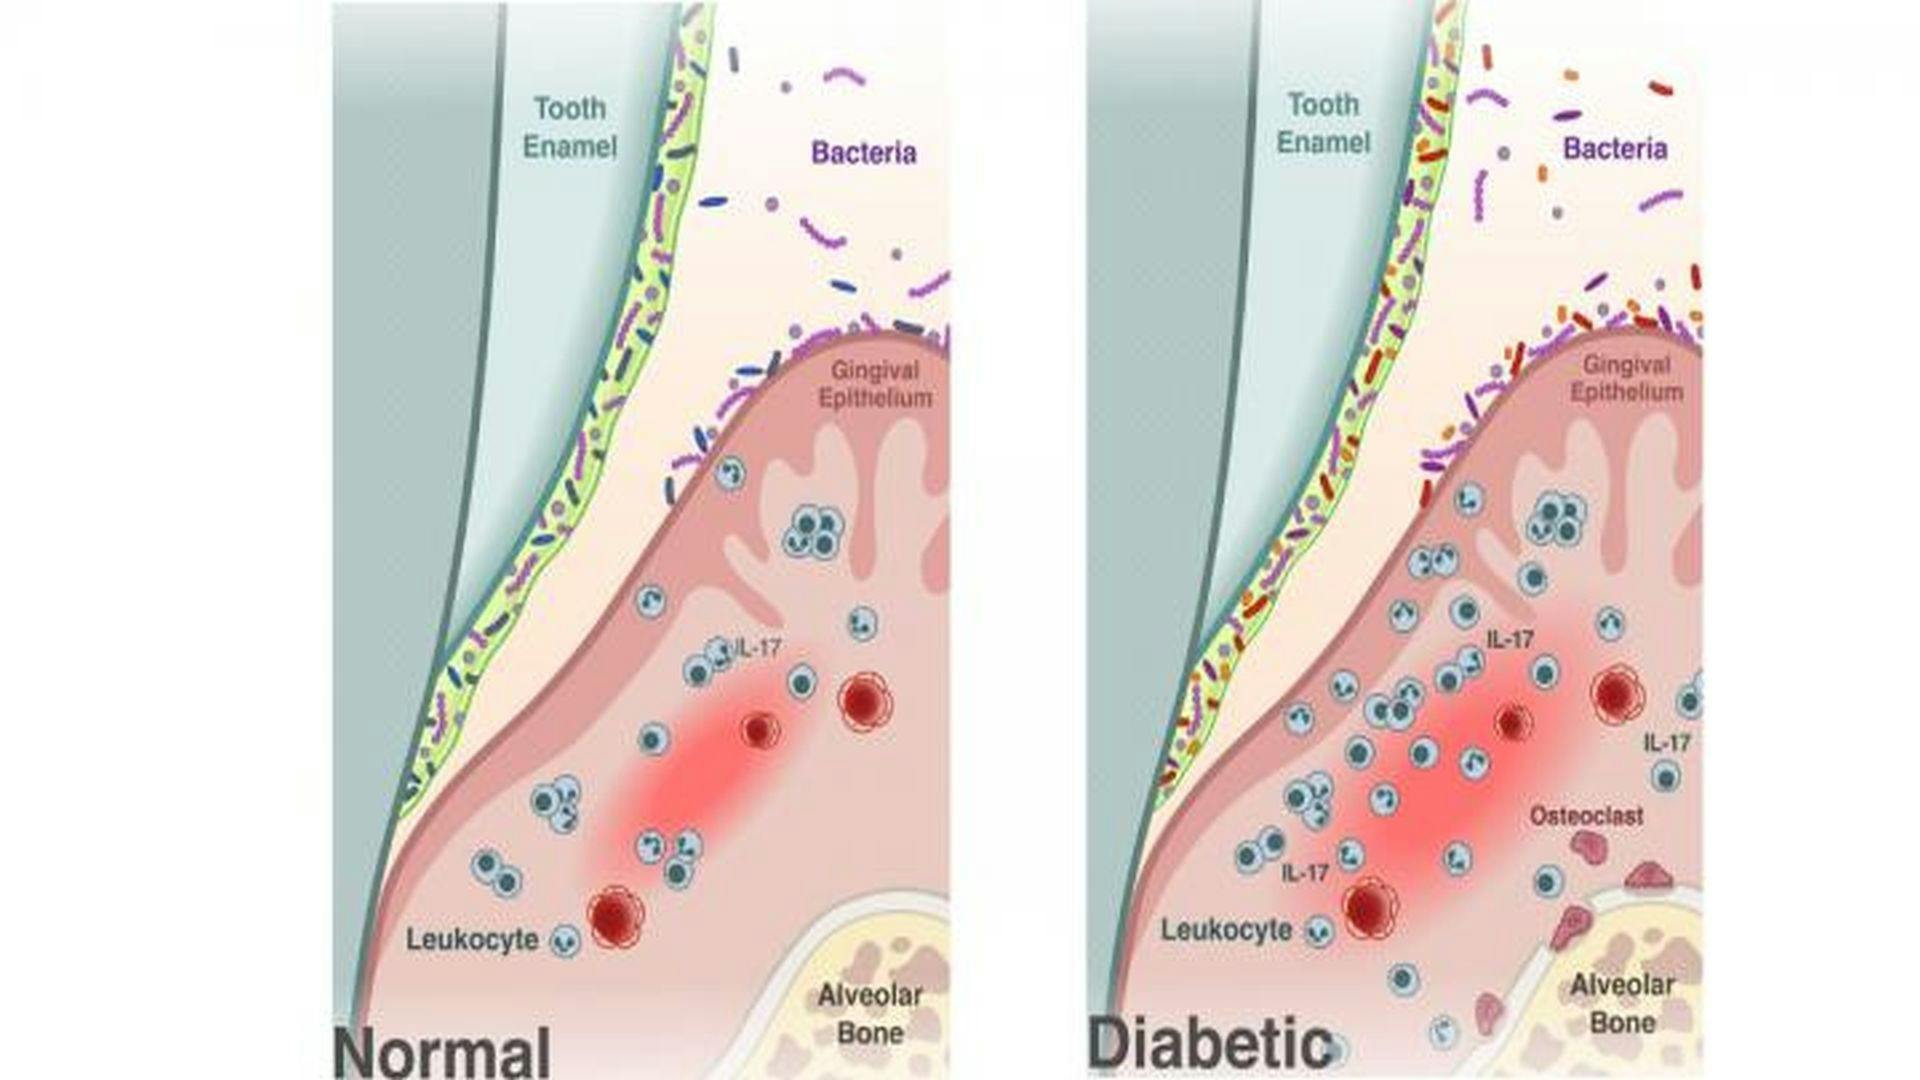 Diabetes Causes Shift in Oral Microbiome That Fosters Periodontitis